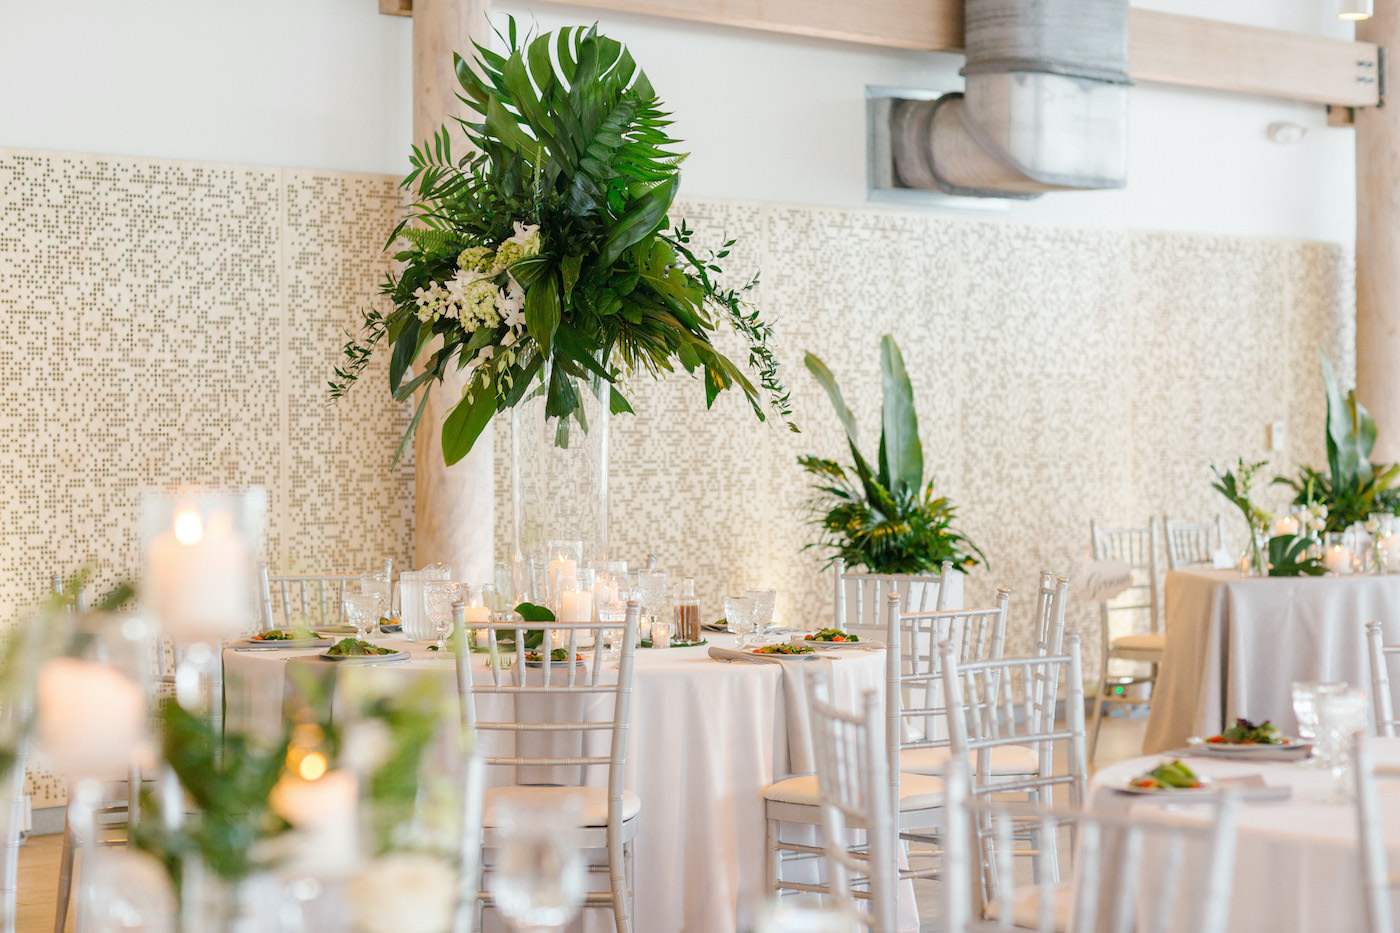 Tropical Tampa Florida Wedding Reception | White Wedding Reception Tables with Silver Chiavari Chairs and Tall Tropical Palm Leaf Centerpiece with White Orchids | Tampa Wedding Florist Bruce Wayne Florals